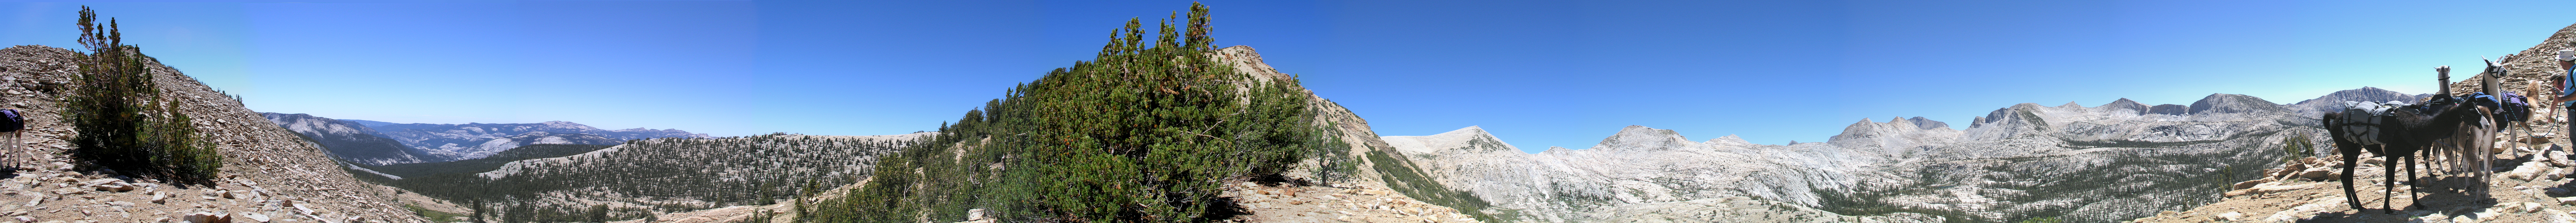 On top of the pass between Meadow Brook and Bench Valley, John Muir Wilderness, California